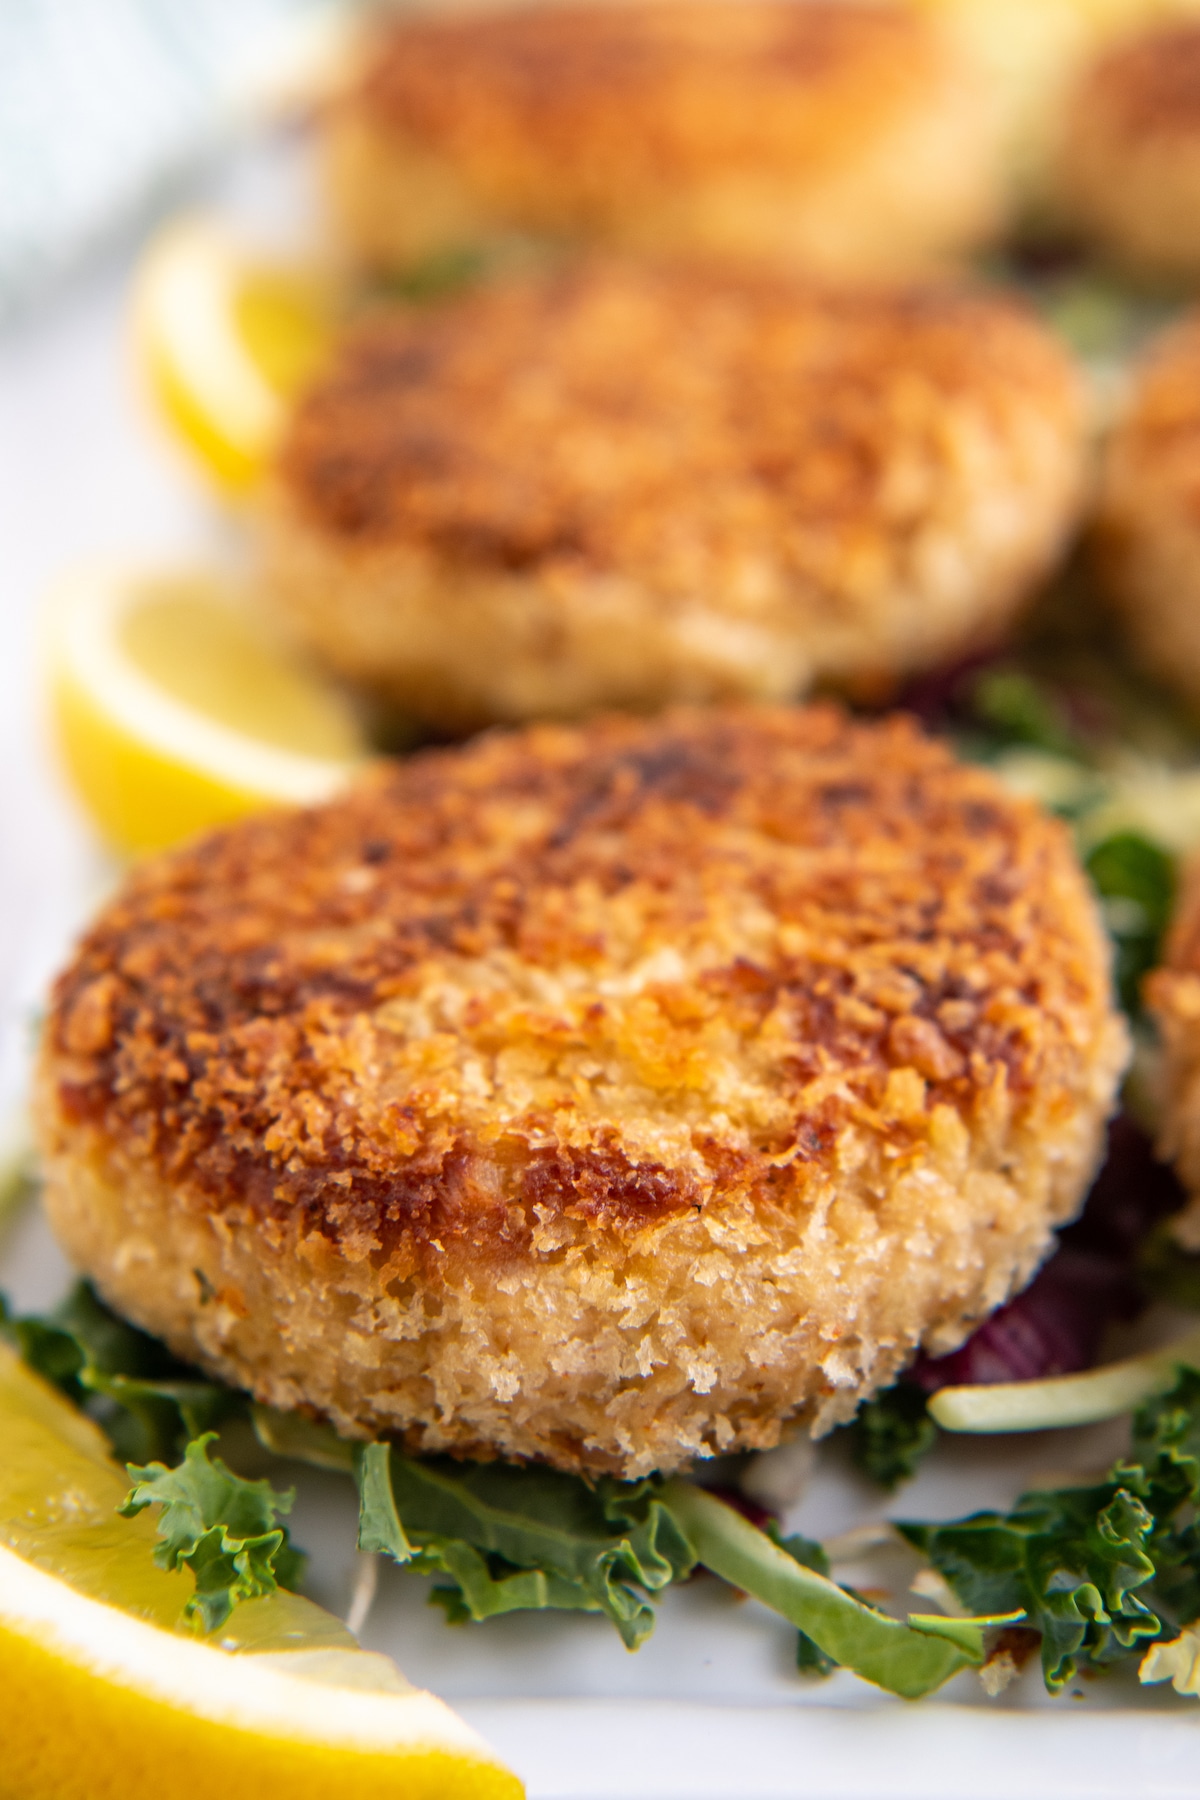 Tuna patties on a bed of greens with lemon wedges.